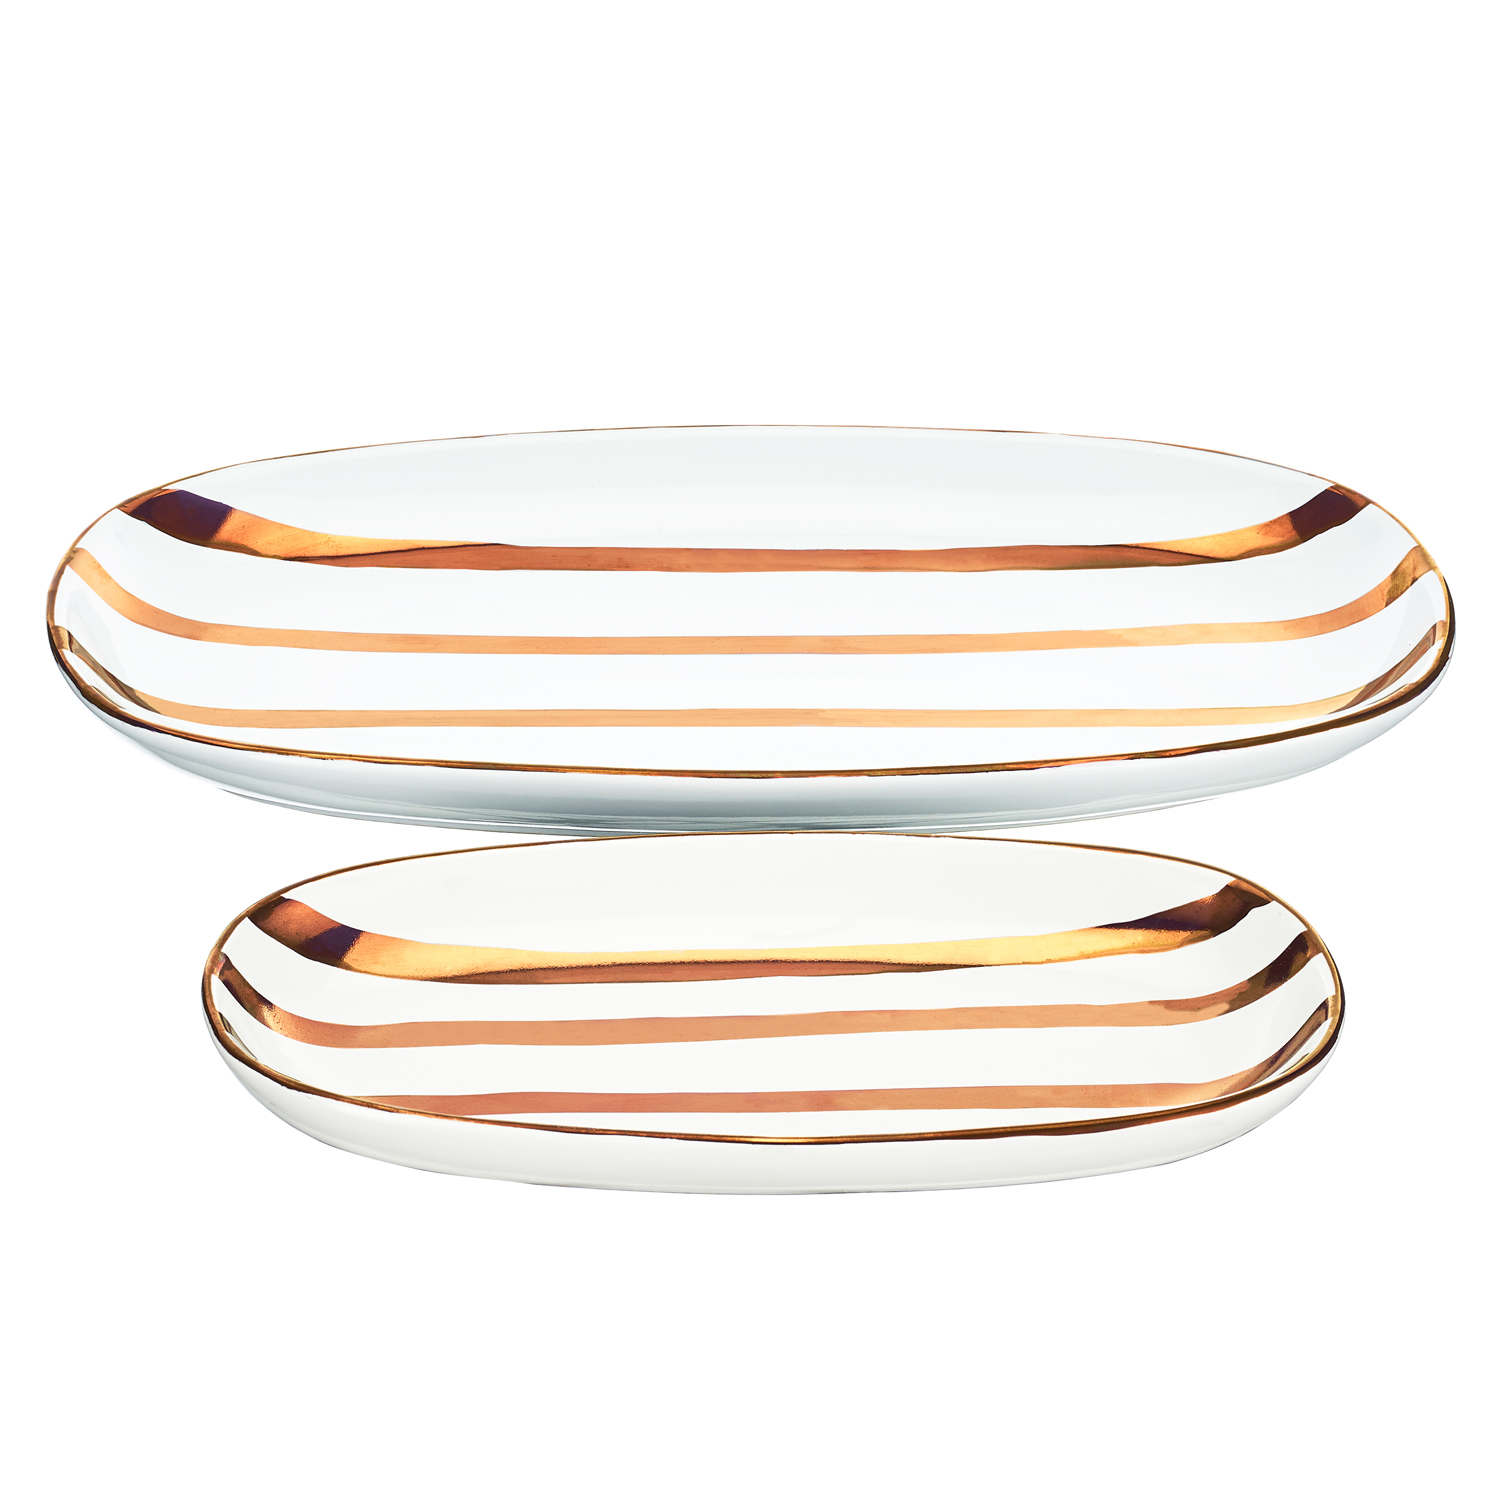 Rose Gold Striped 2-Piece Oval Stoneware Serving Platter - image 4 of 5